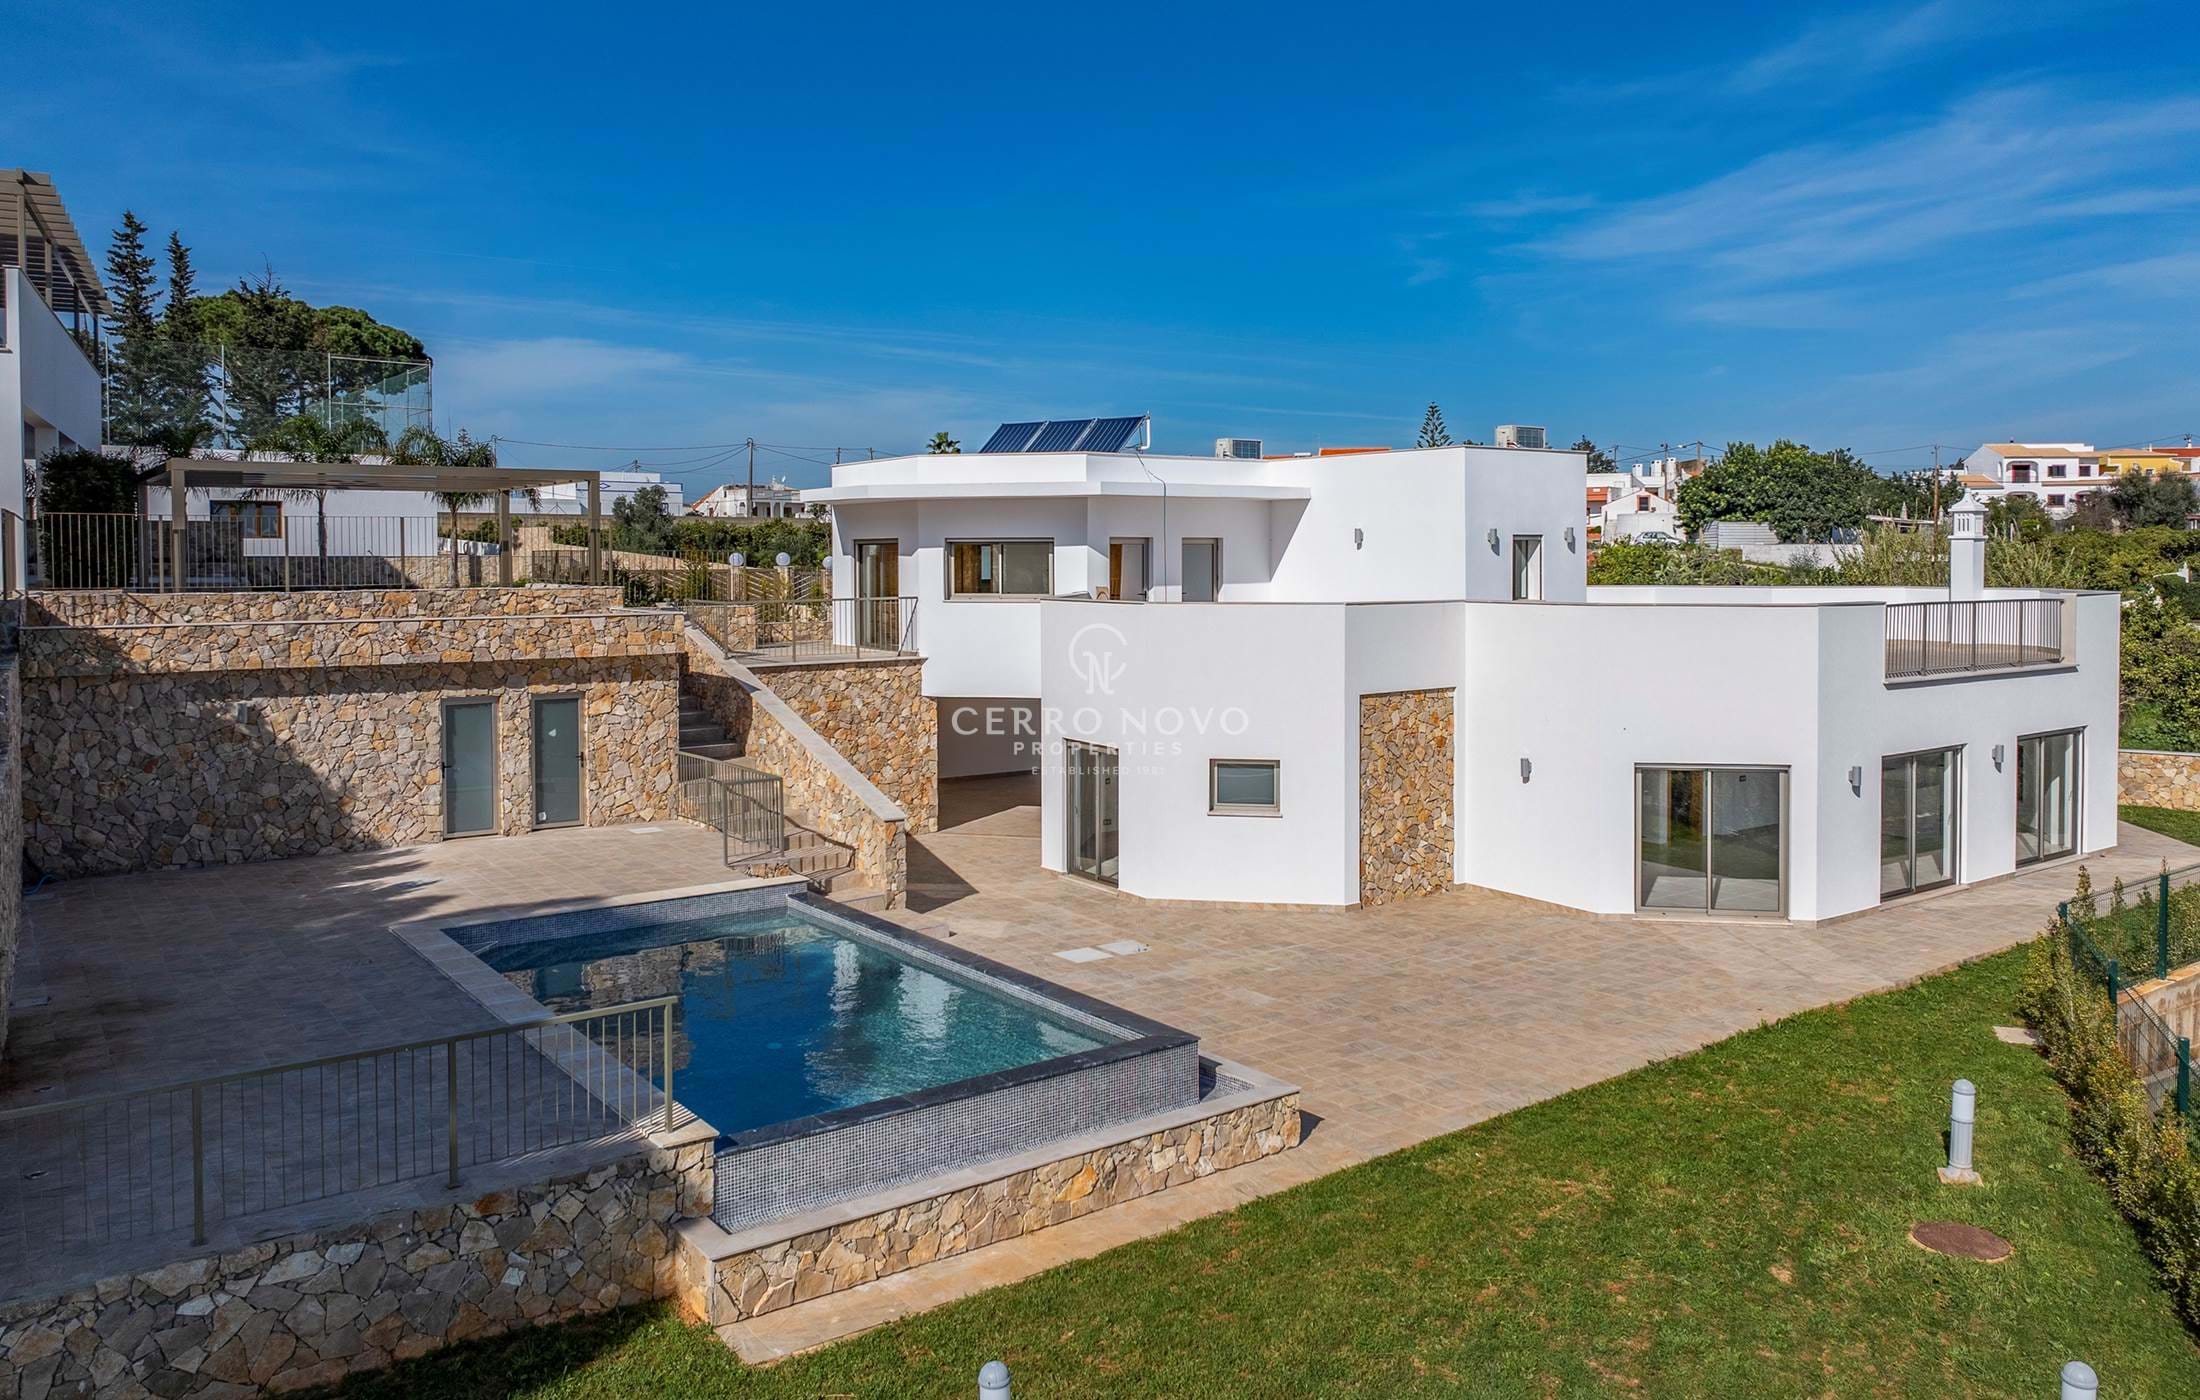 Stunning four-bedroom villa with sea view and swimming pool.